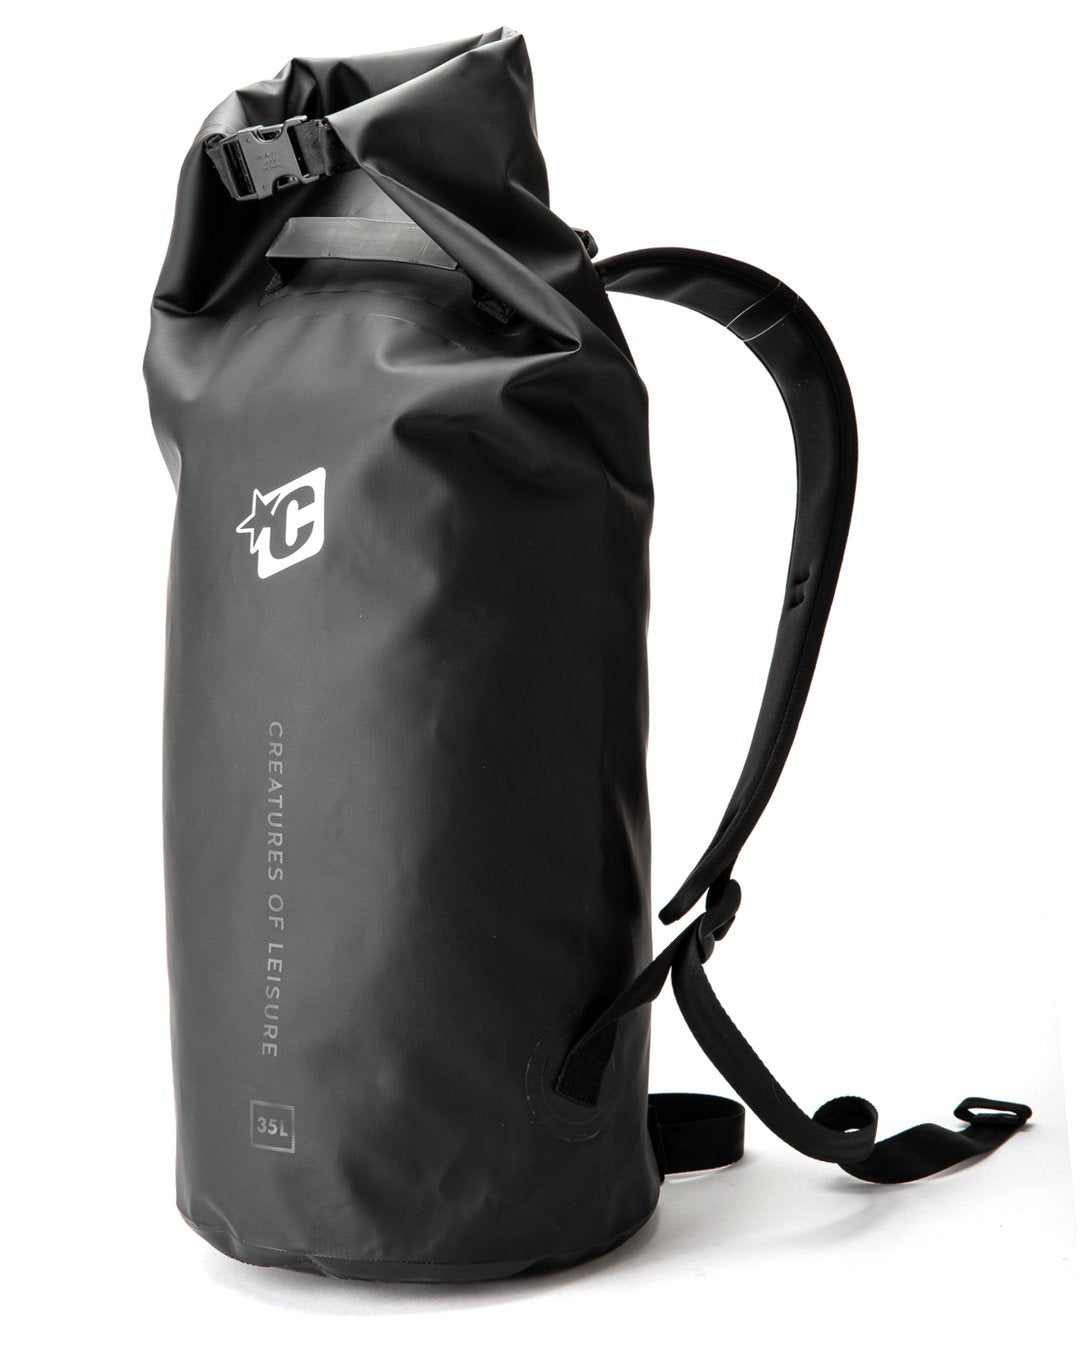 Creatures DAY USE DRY BAG 35L : BLACK - Board Store CreaturesAccessories  